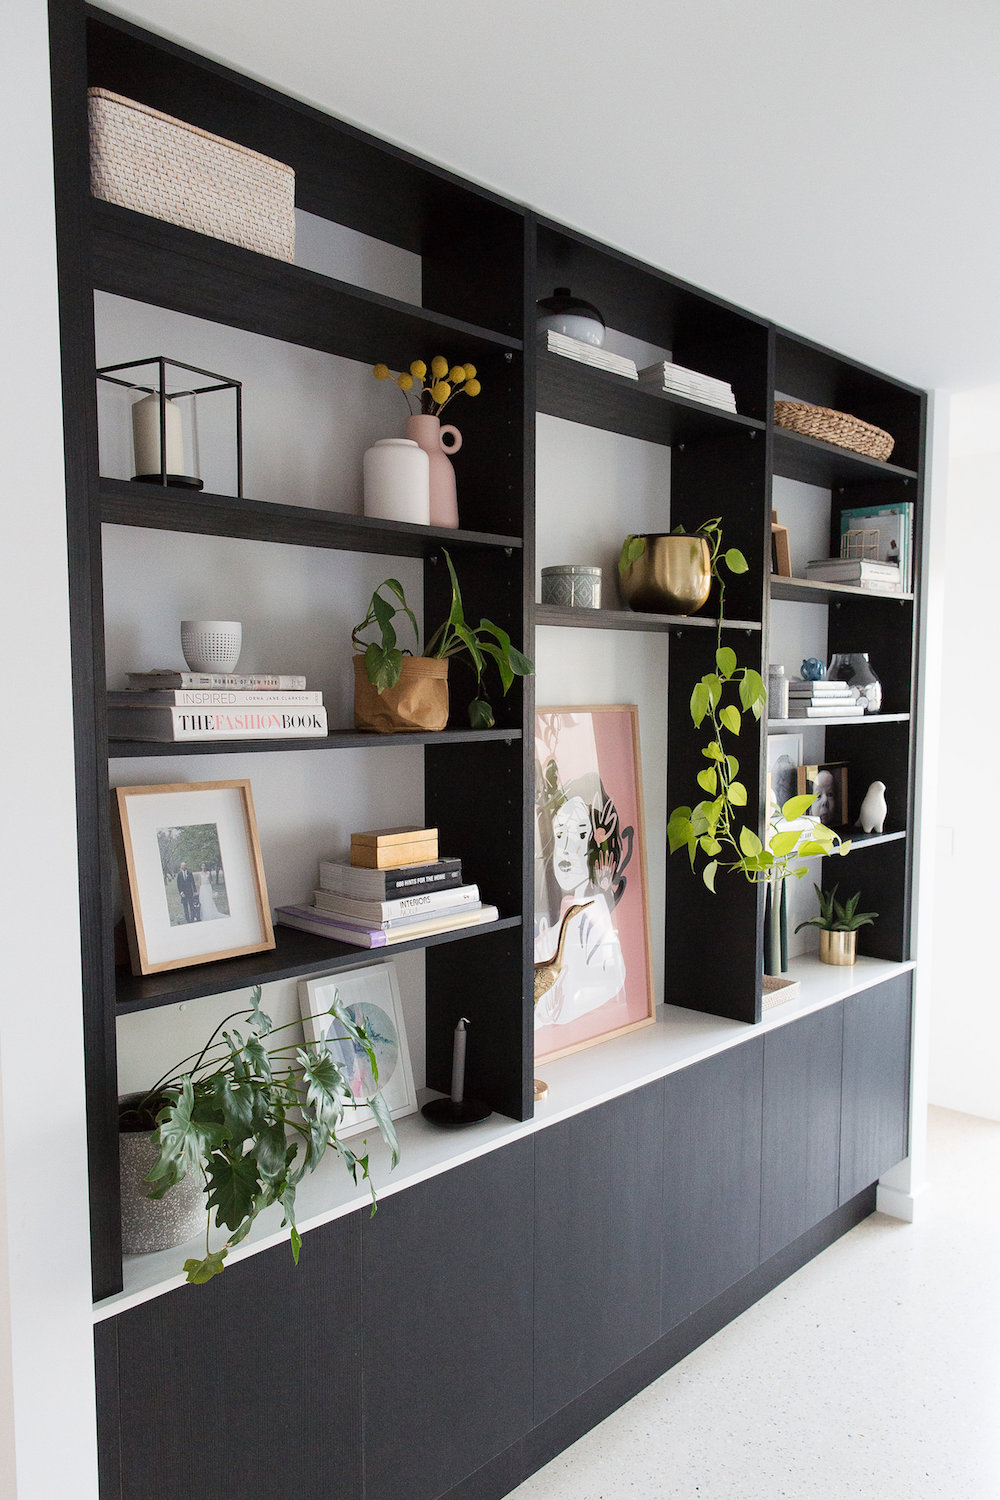 How to style a bookshelf - add metallic accents interior styling tricks